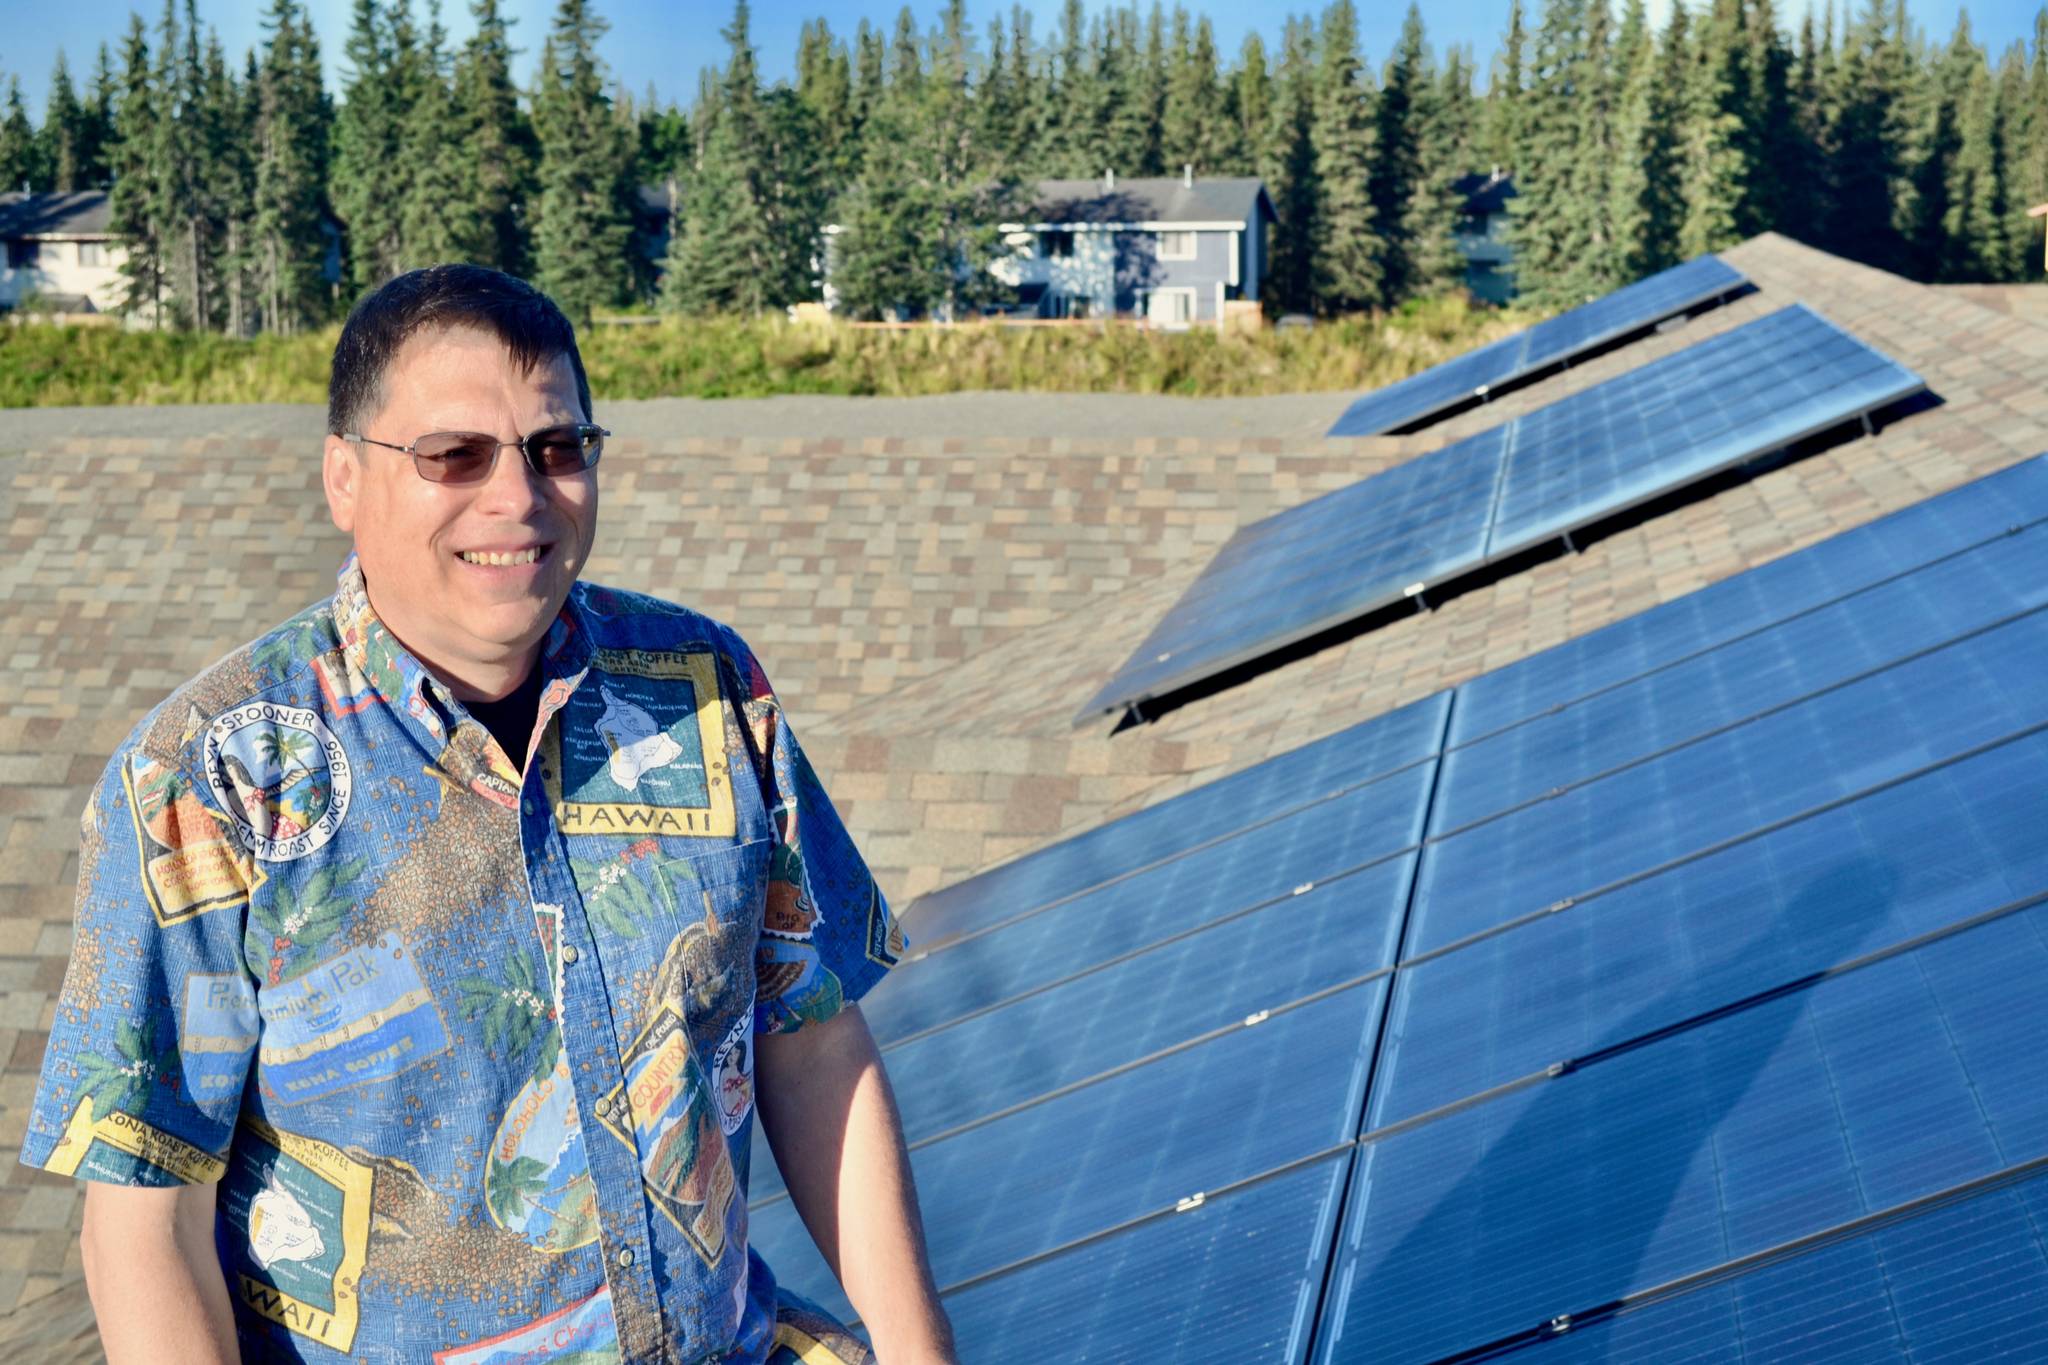 Dale Bagley on top of the roof of his business, Redoubt Realty, where he installed 48 solar panels earlier this summer on Friday, Aug. 17, 2018 near Soldotna, Alaska. (Photo by Victoria Petersen/Peninsula Clarion)